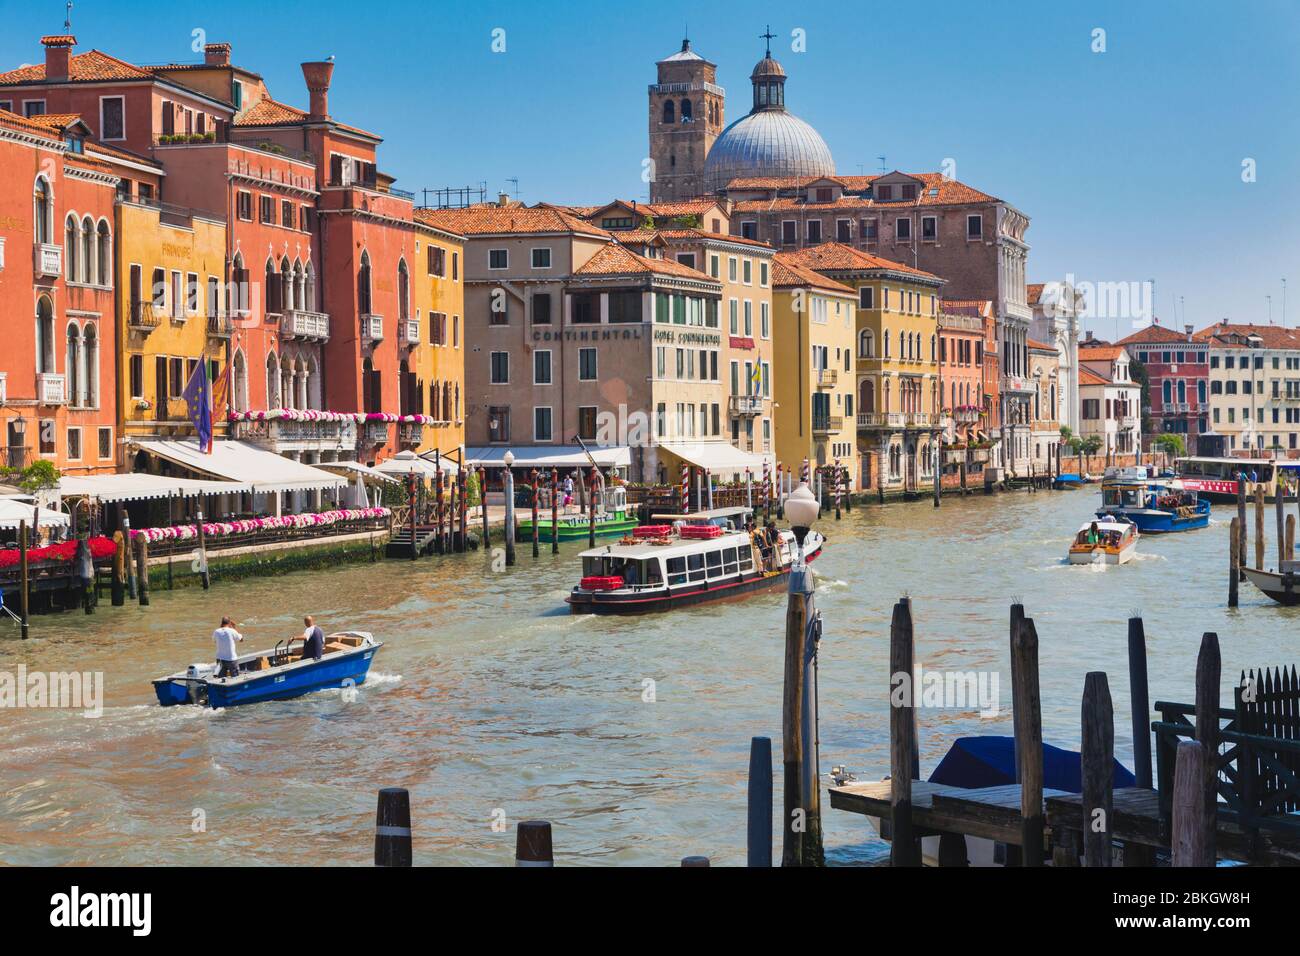 Venice, Venice Province, Veneto Region, Italy.    Traffic, including a Vaporetto, or ferry, on the Grand Canal.  Venice is a UNESCO World Heritage Sit Stock Photo